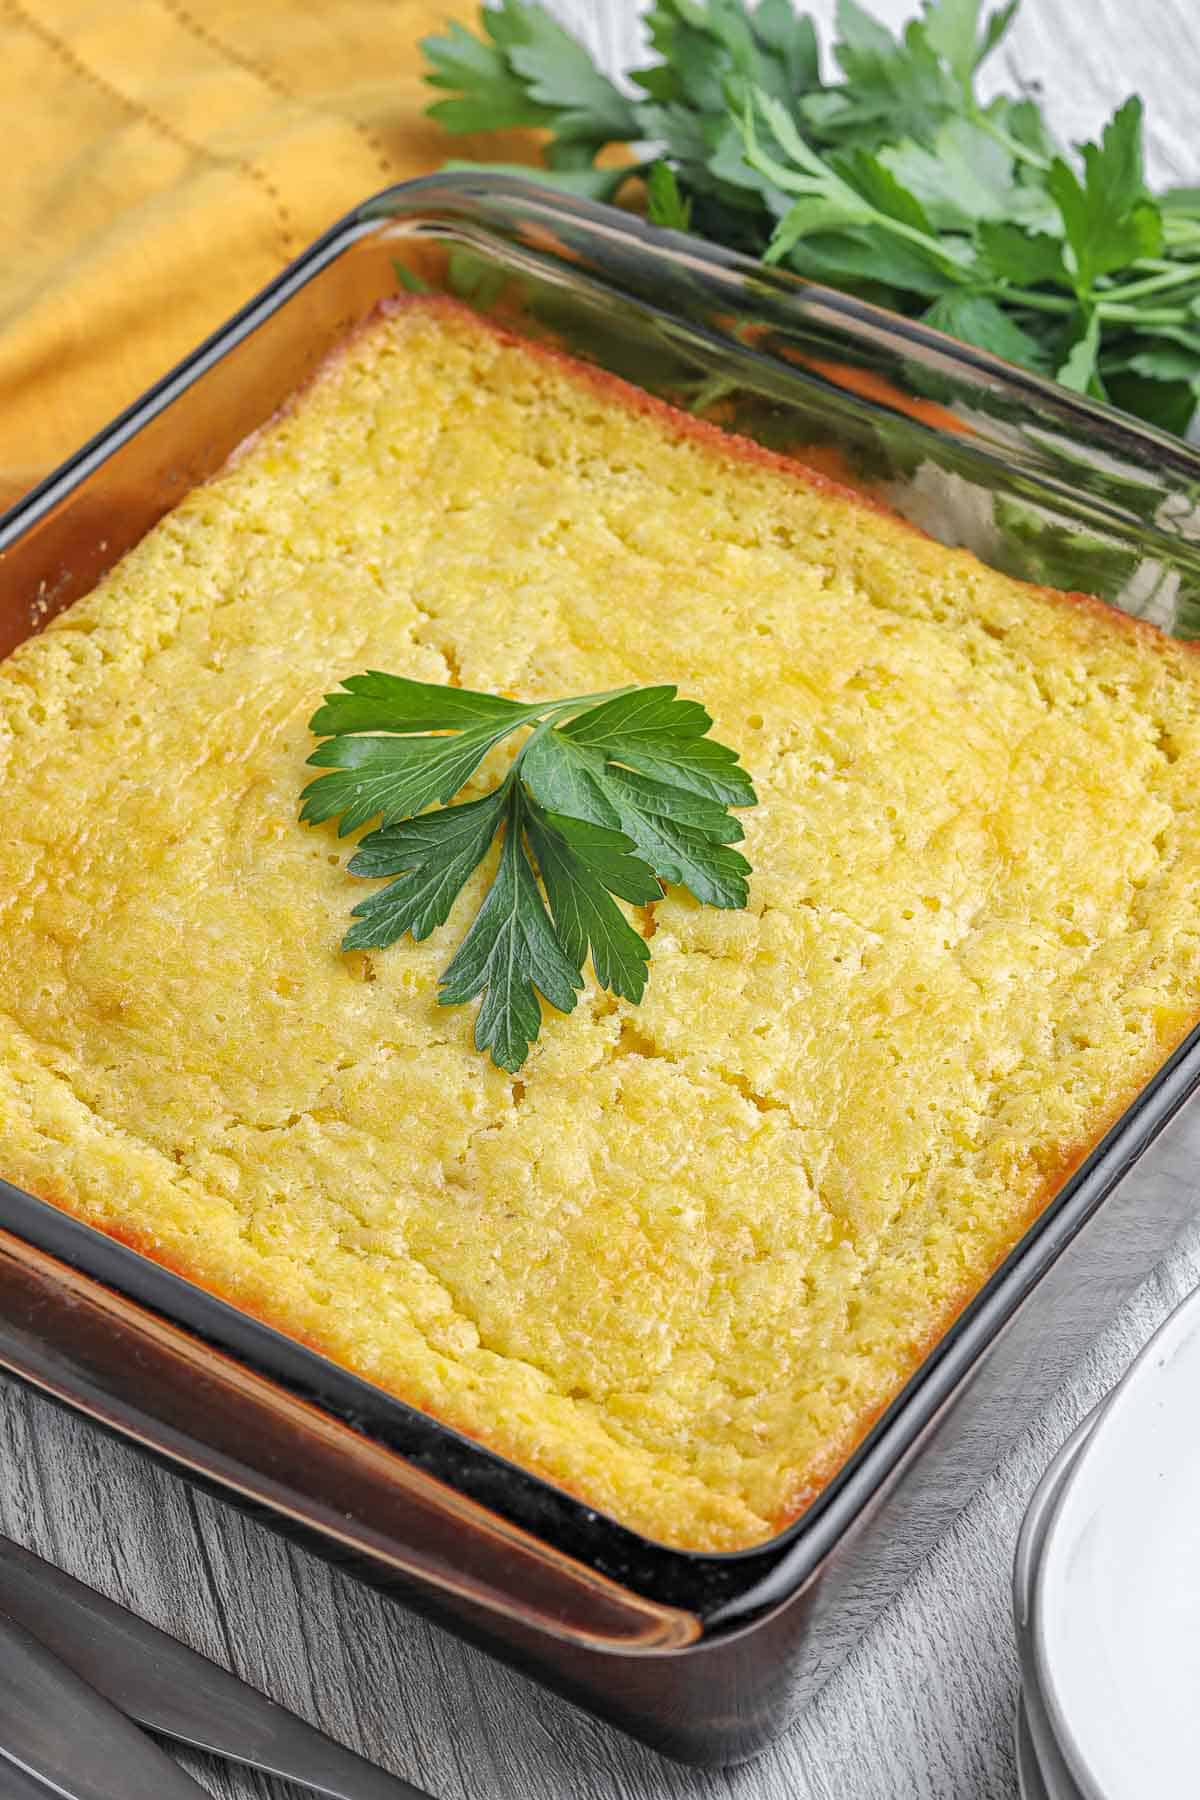 Corn casserole with parsley in a baking dish.